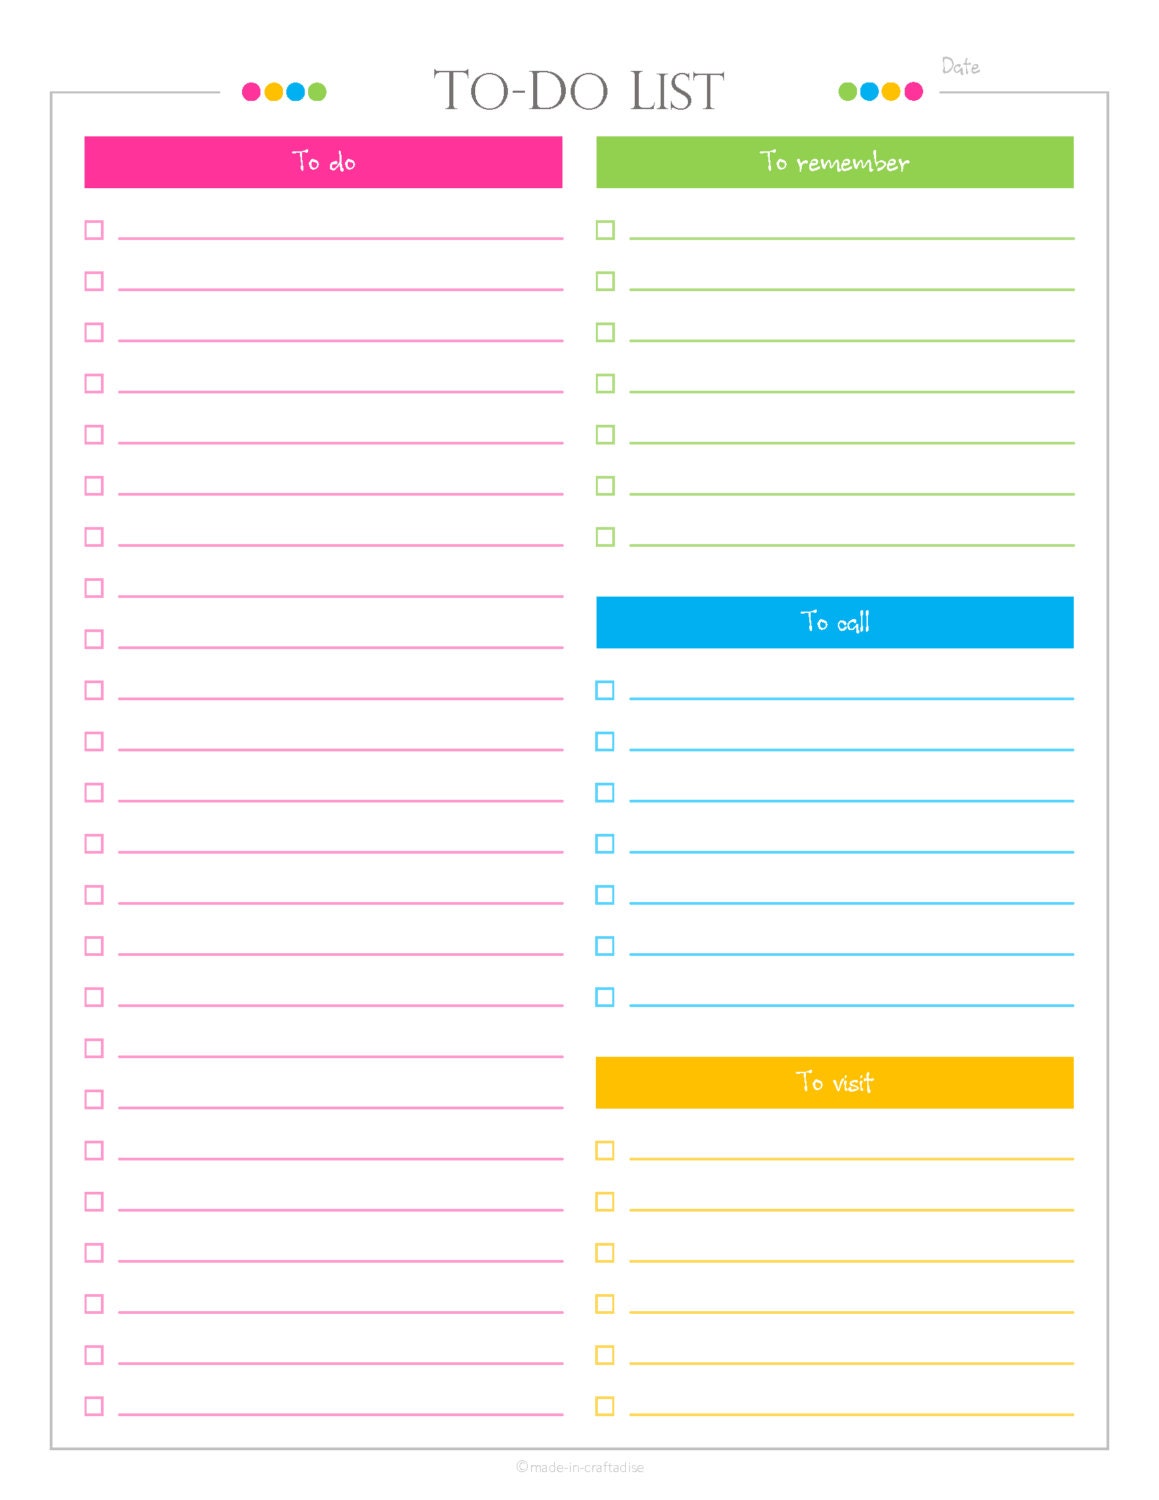 daily-to-do-checklist-with-categories-pdf-planner-list-etsy